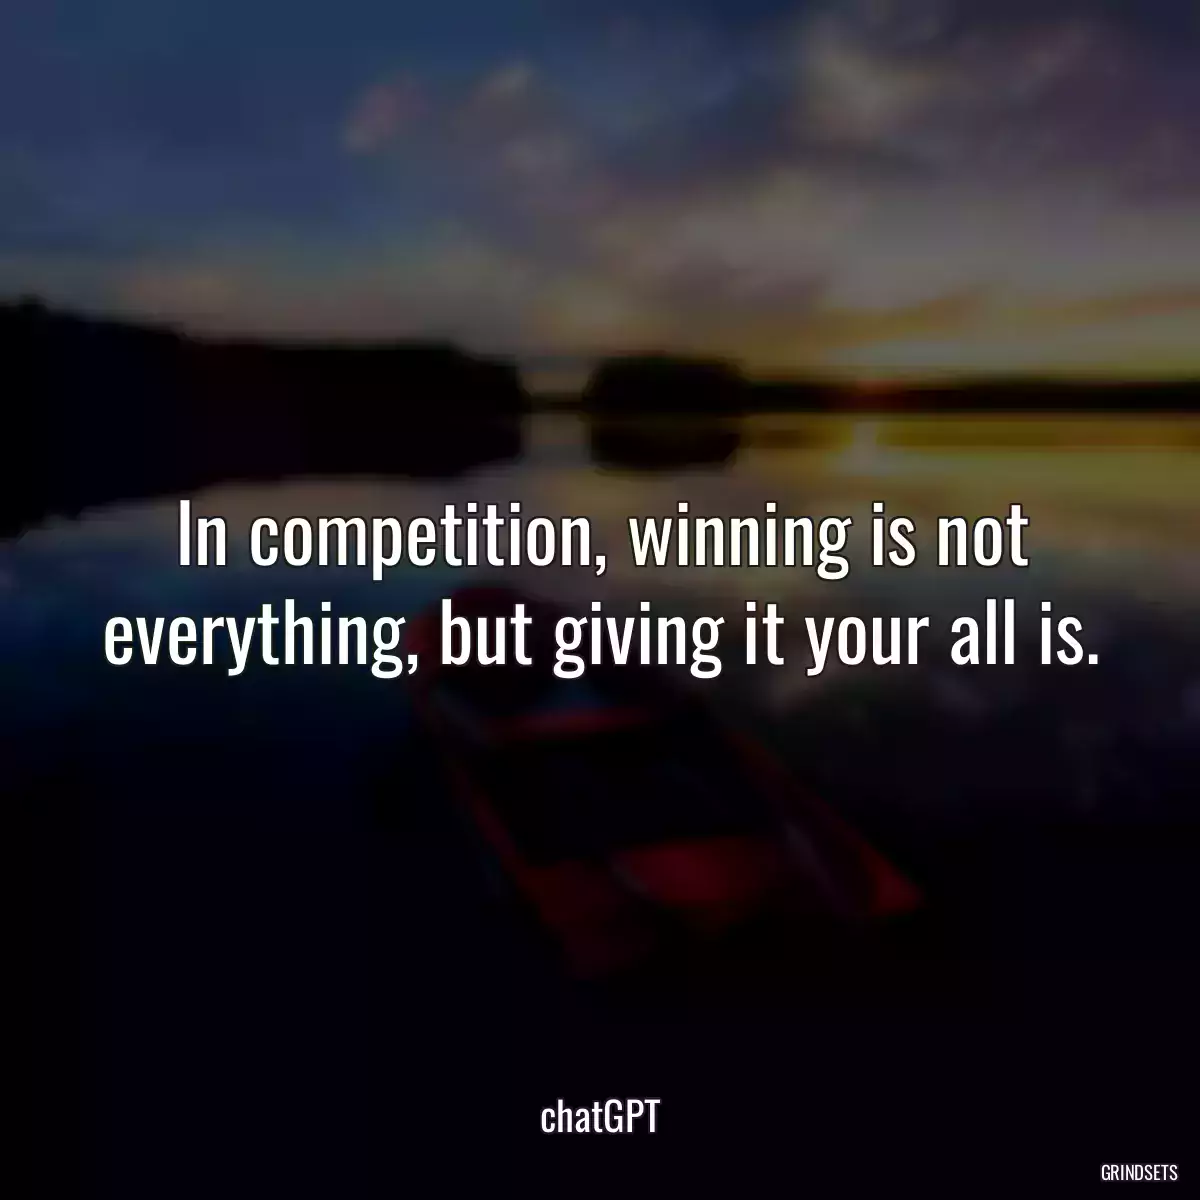 In competition, winning is not everything, but giving it your all is.